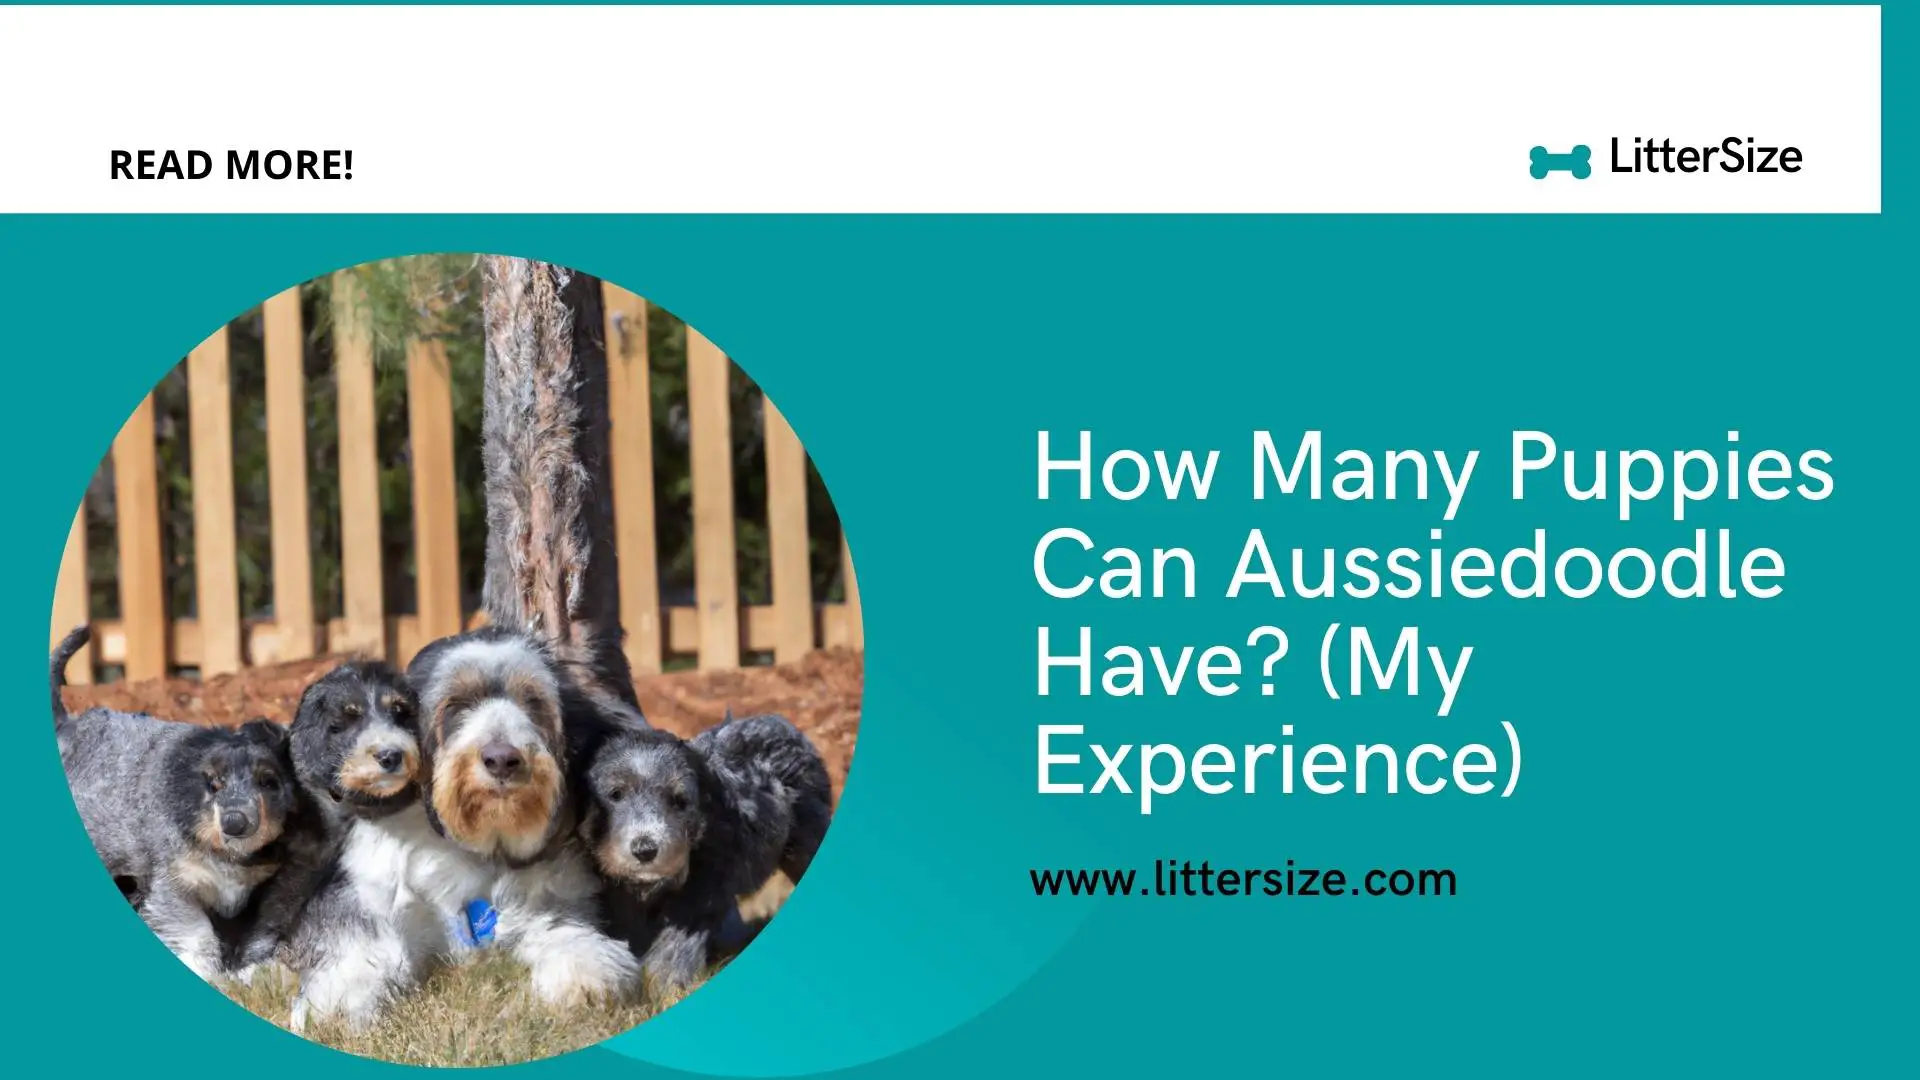 How Many Puppies Can Aussiedoodle Have? (My Experience)